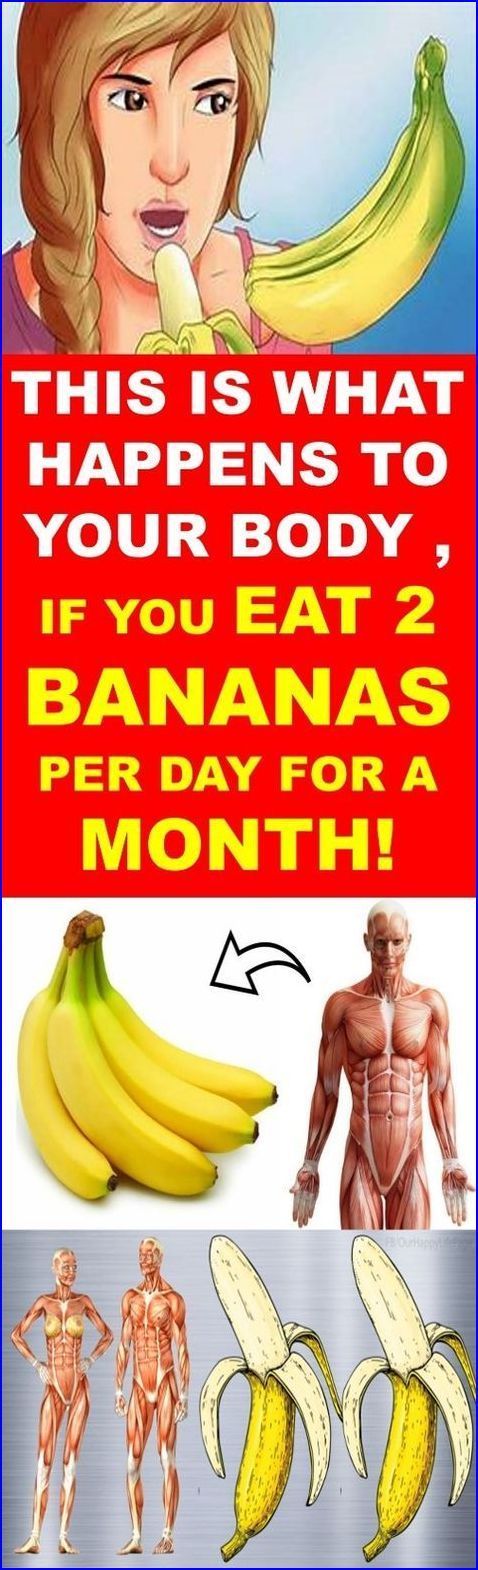 If You Eat 2 Bananas Per Day For A Month This Is What Happens To Your Body